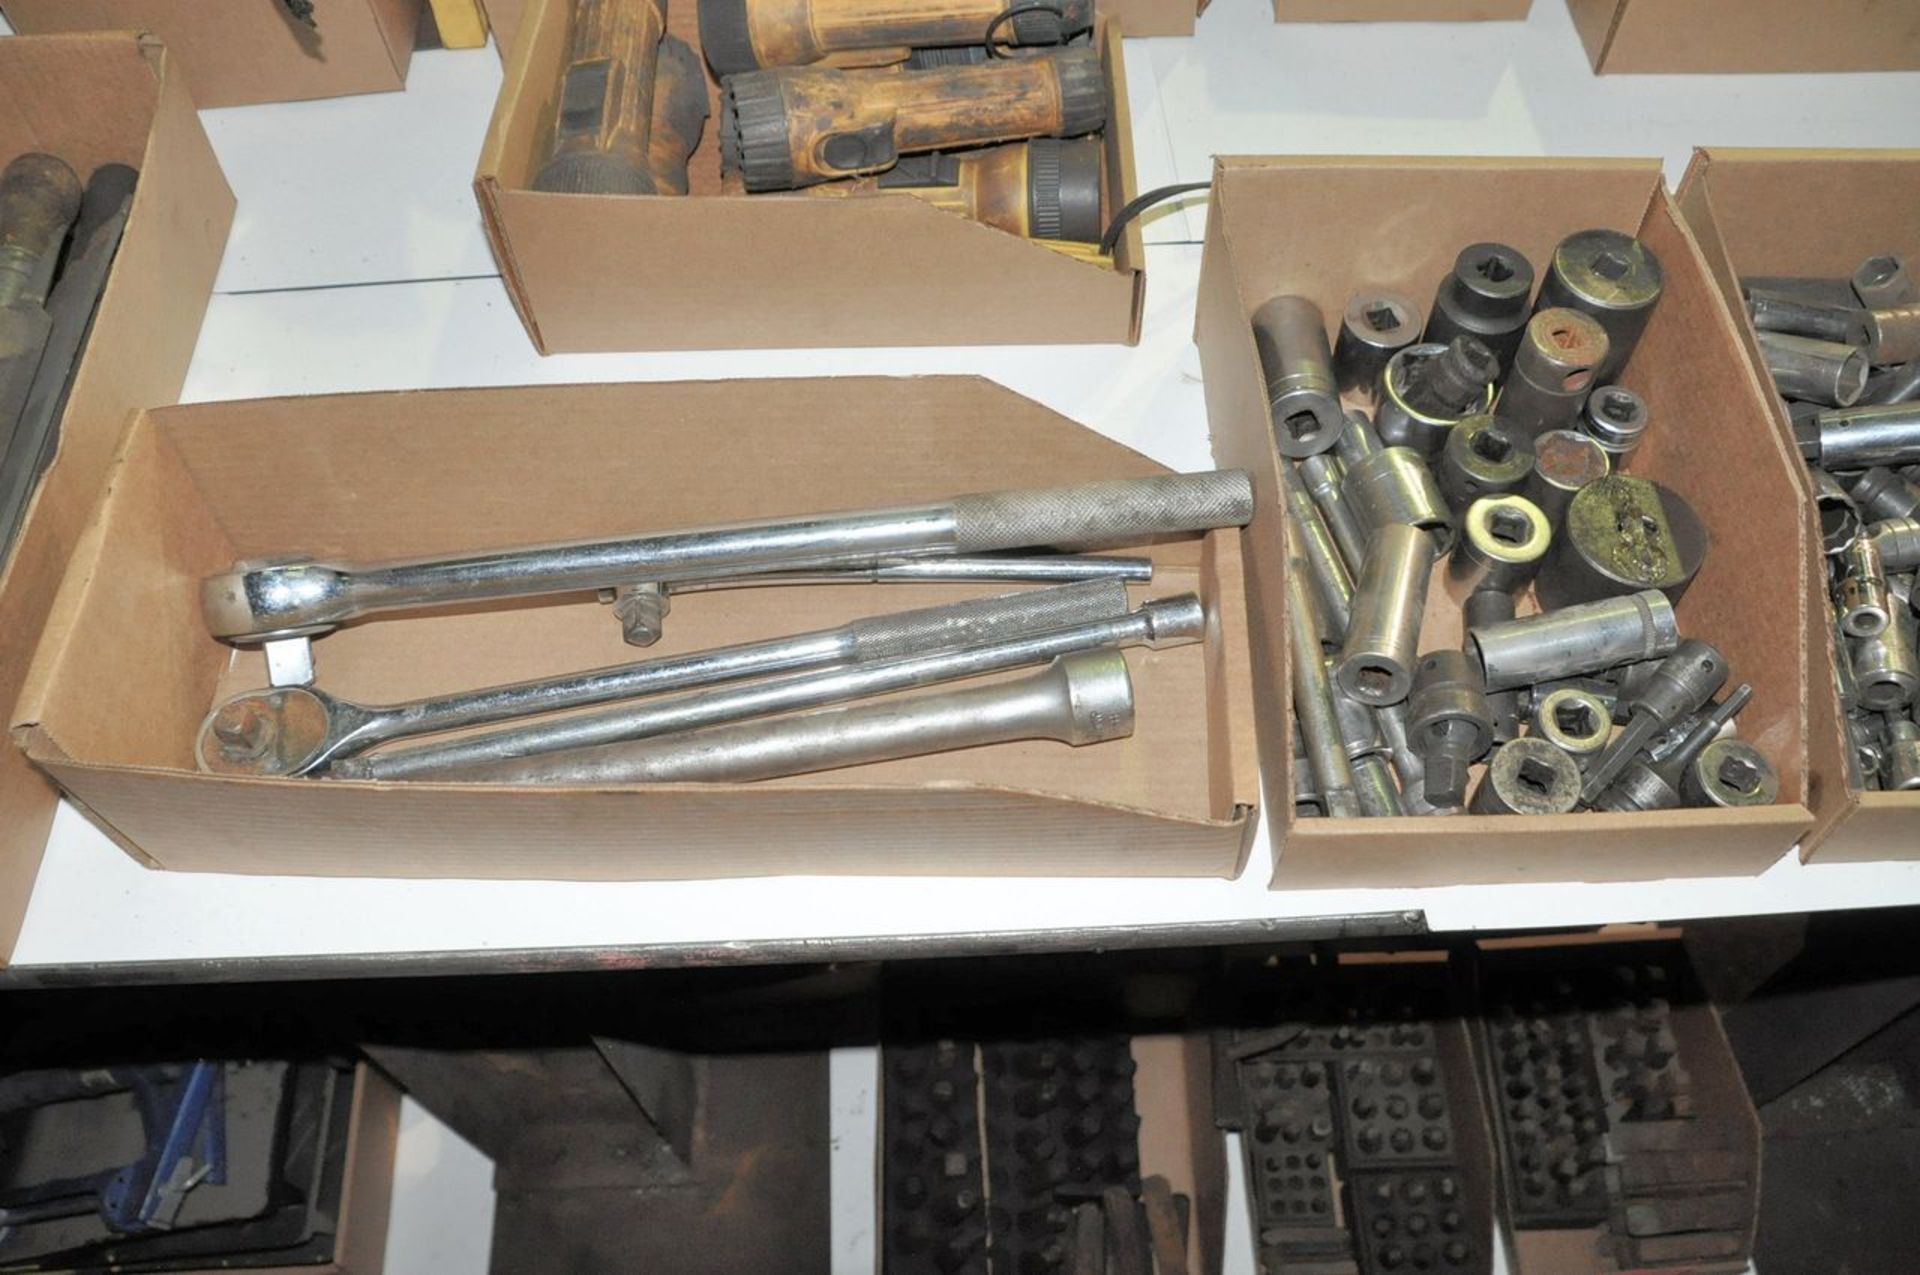 Lot - 3/4", 1/2", 3/8" and 1/4" Drive Sockets and Ratchets in (5) Boxes, (Machine Shop) - Image 2 of 2